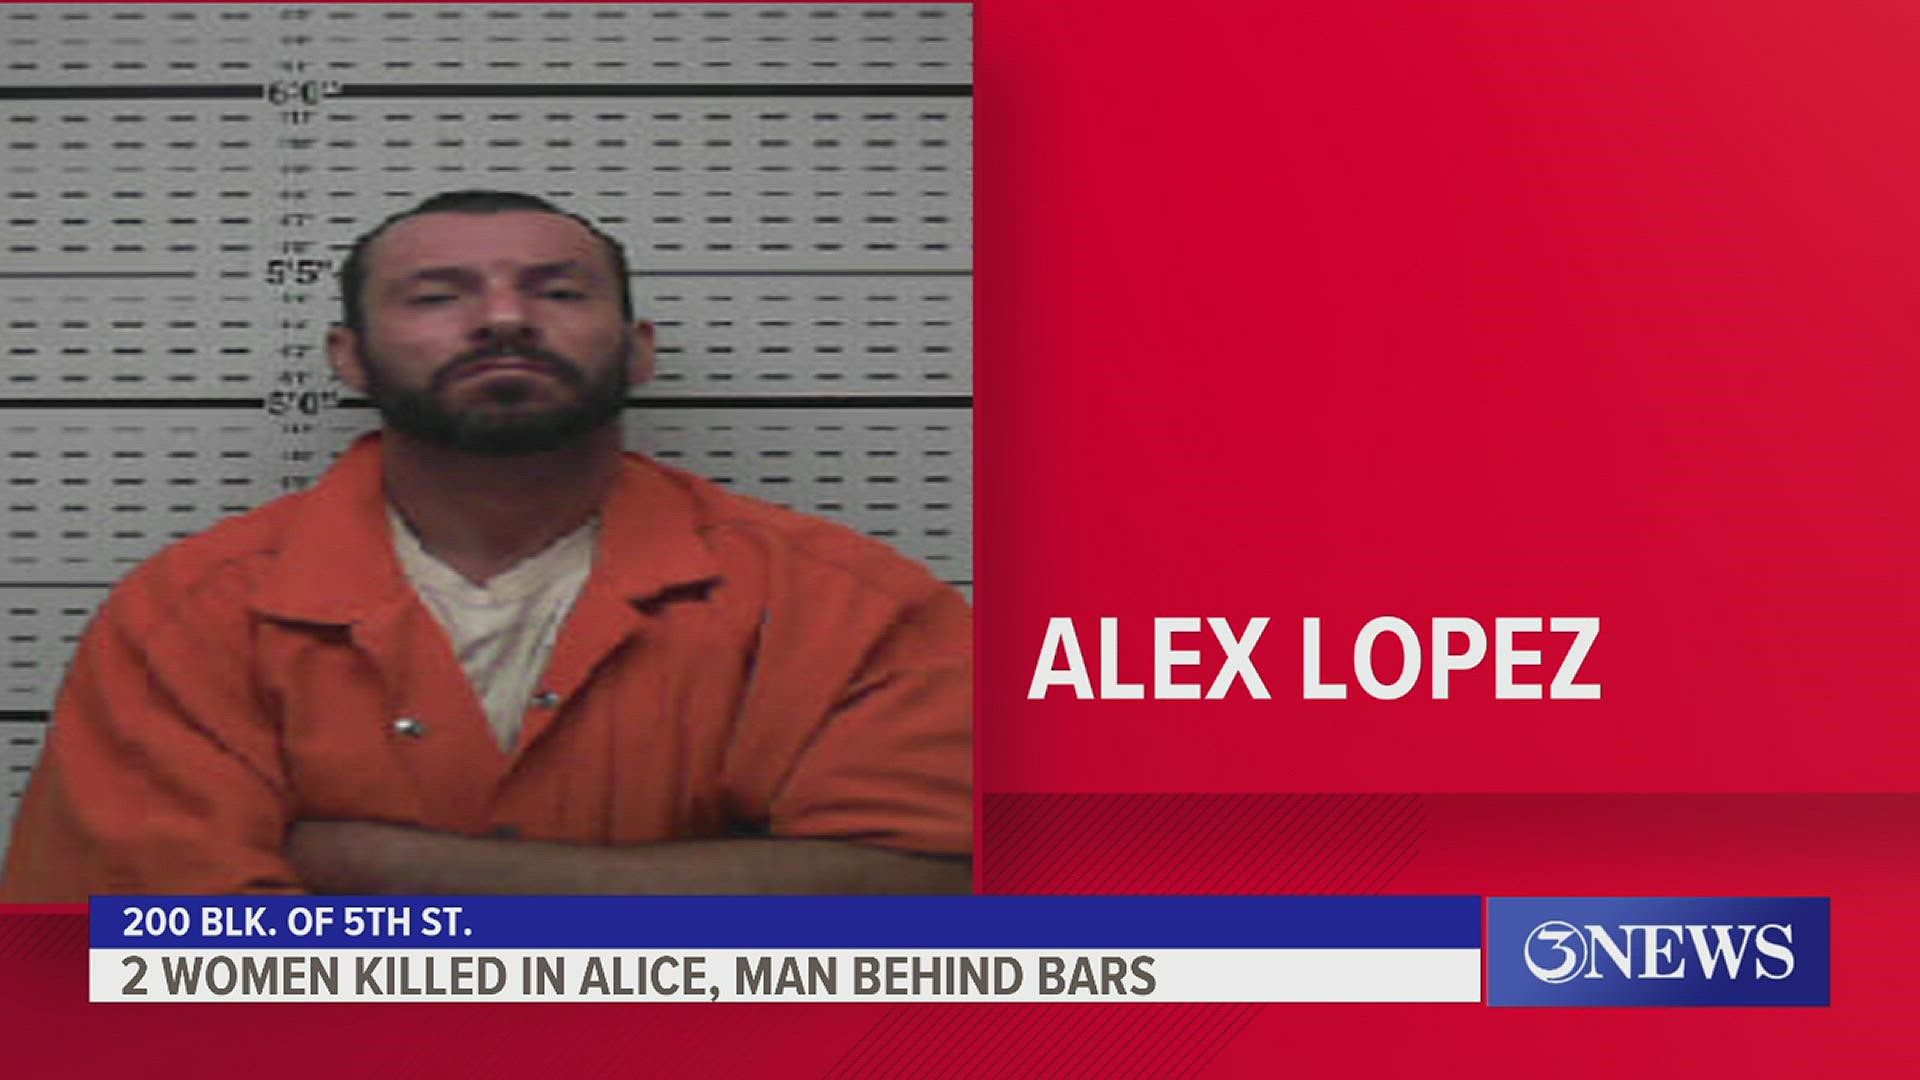 The suspect was identified as Alex Lopez and he has been charged with capital murder.